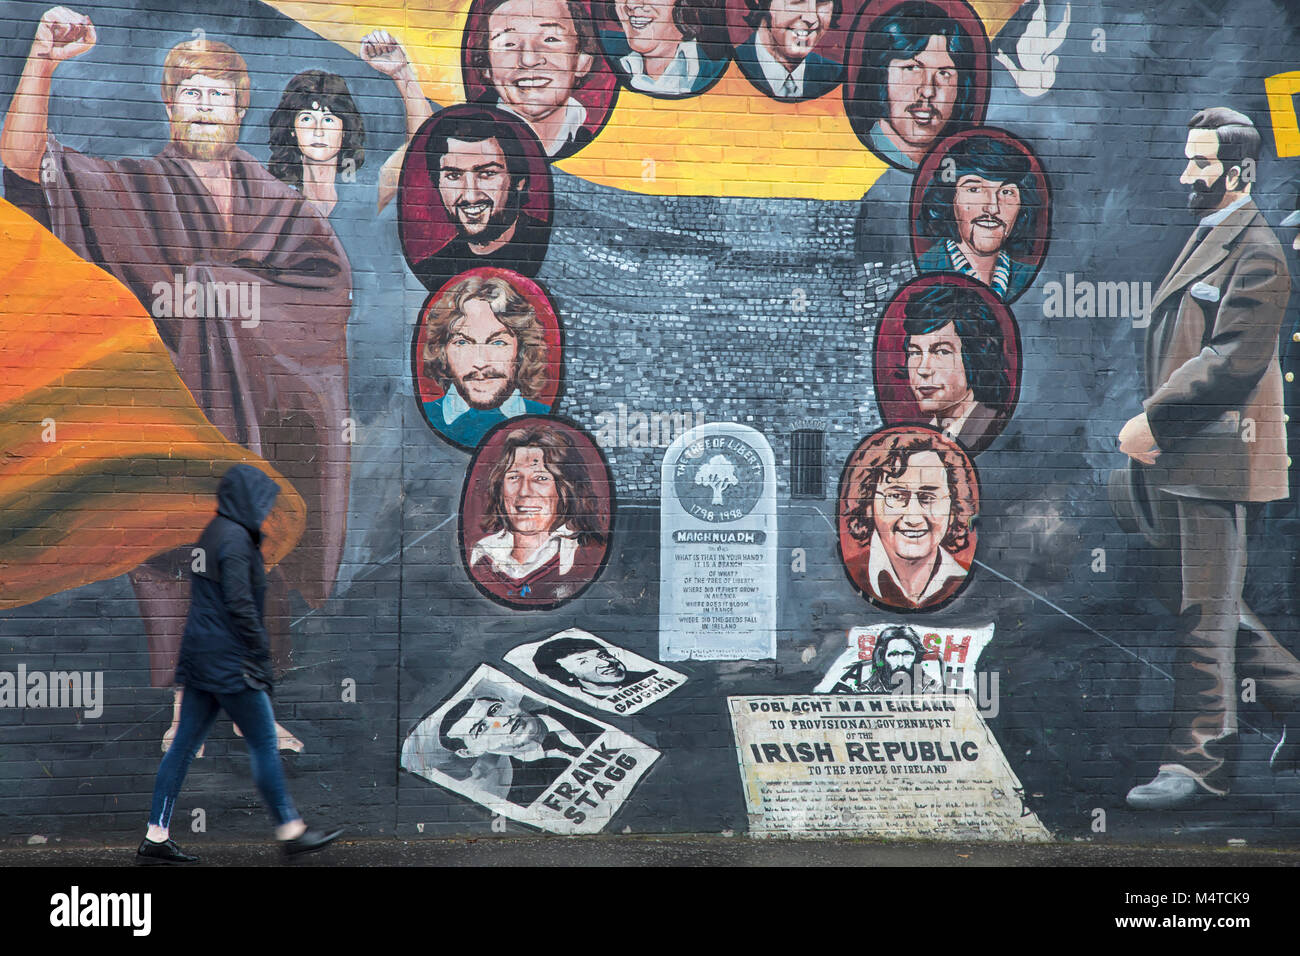 Republican mural commemorating the hunger strike, Falls Road, Belfast, Country Antrim, Northern Ireland. Stock Photo